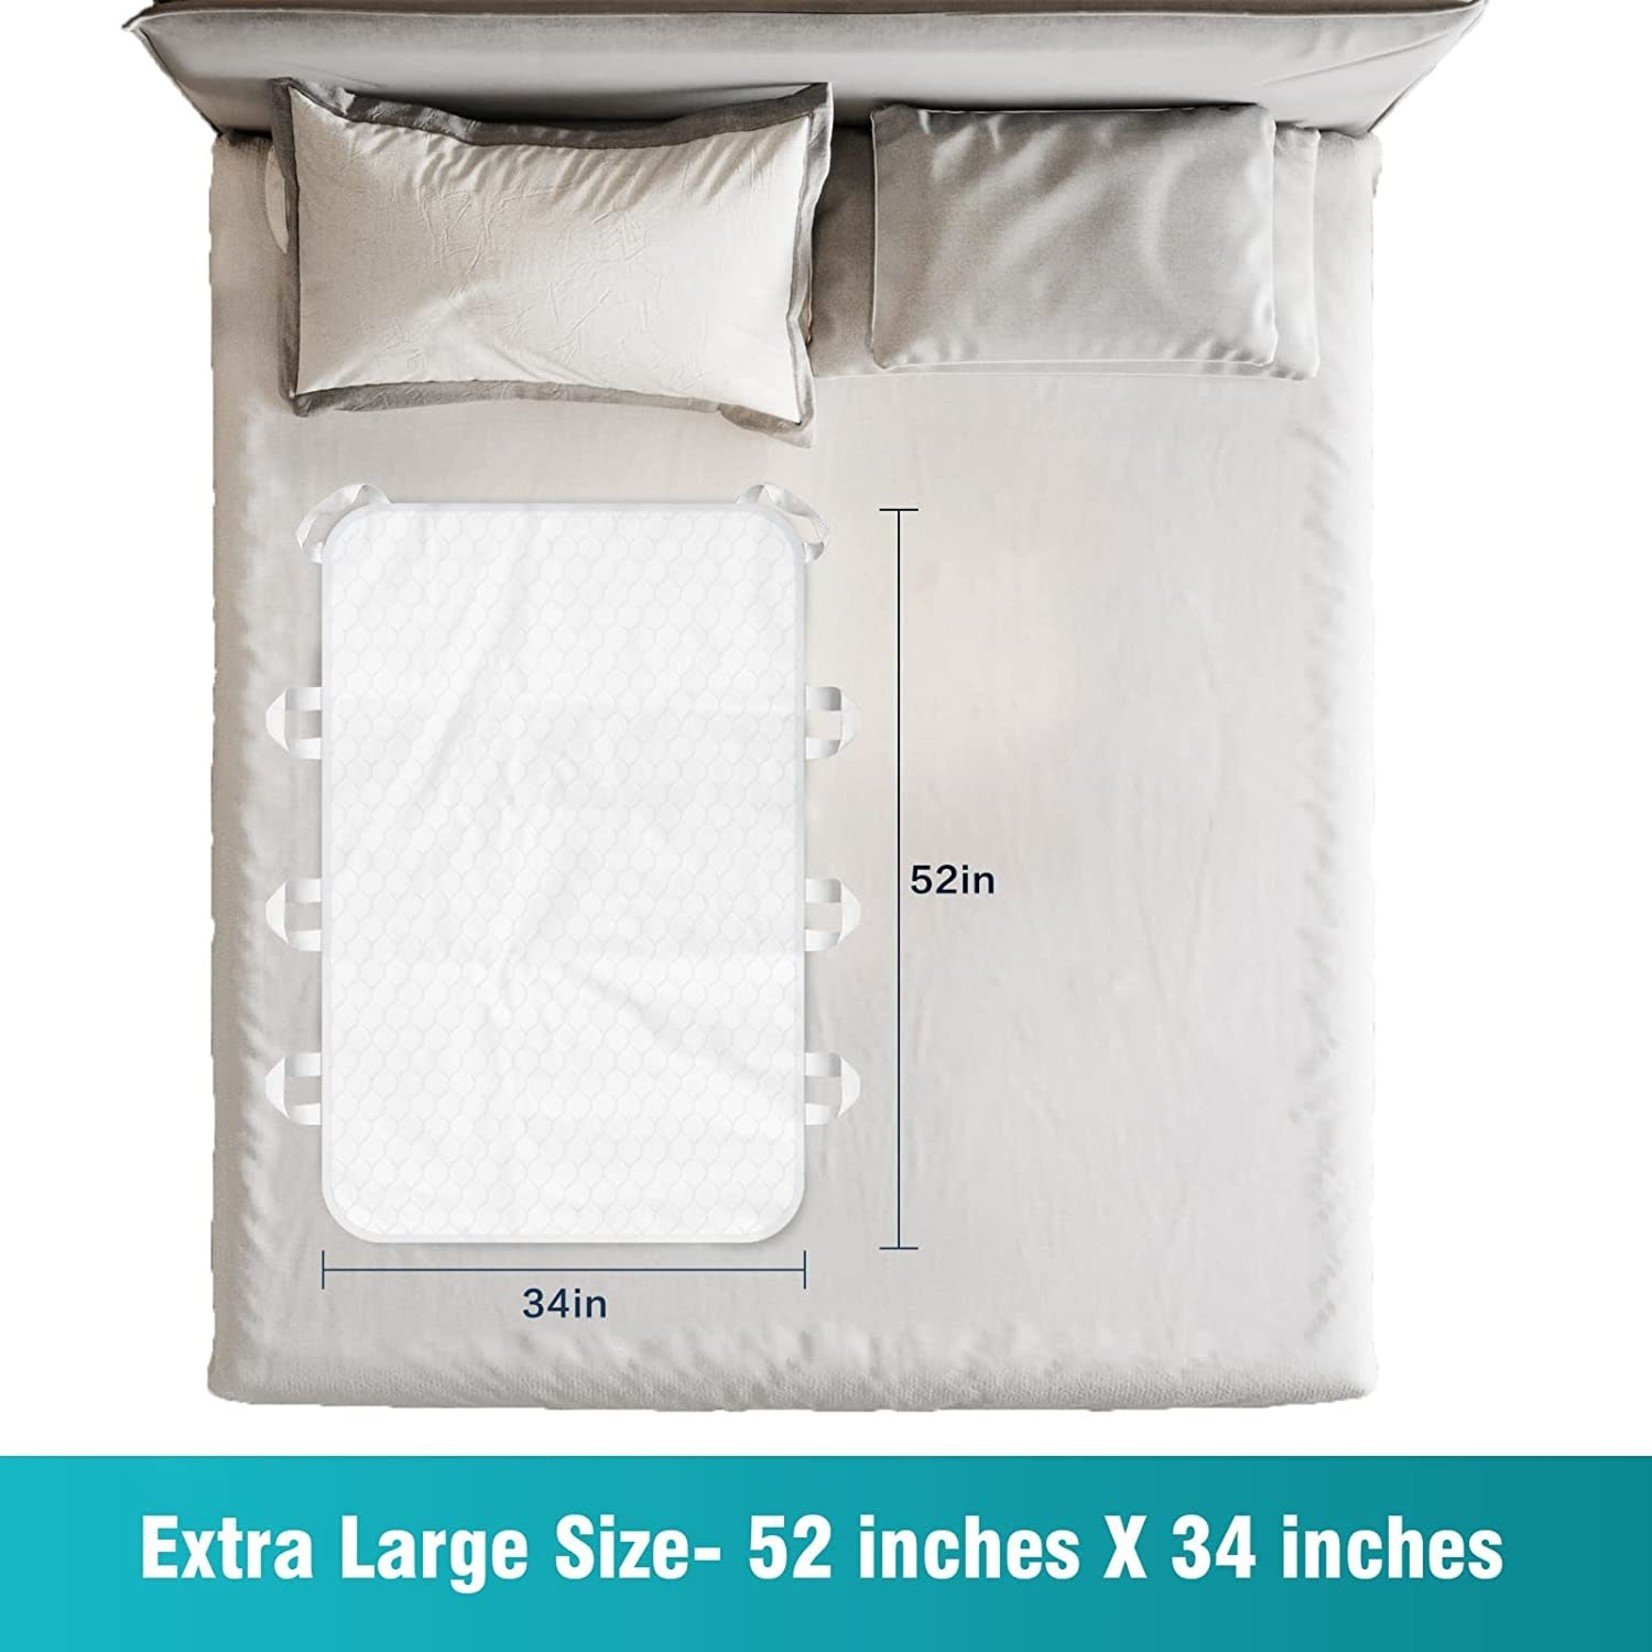 https://cdn.shoplightspeed.com/shops/651929/files/51609280/1652x1652x2/washable-bed-pads-with-8-sturdy-handles-3452-extra.jpg